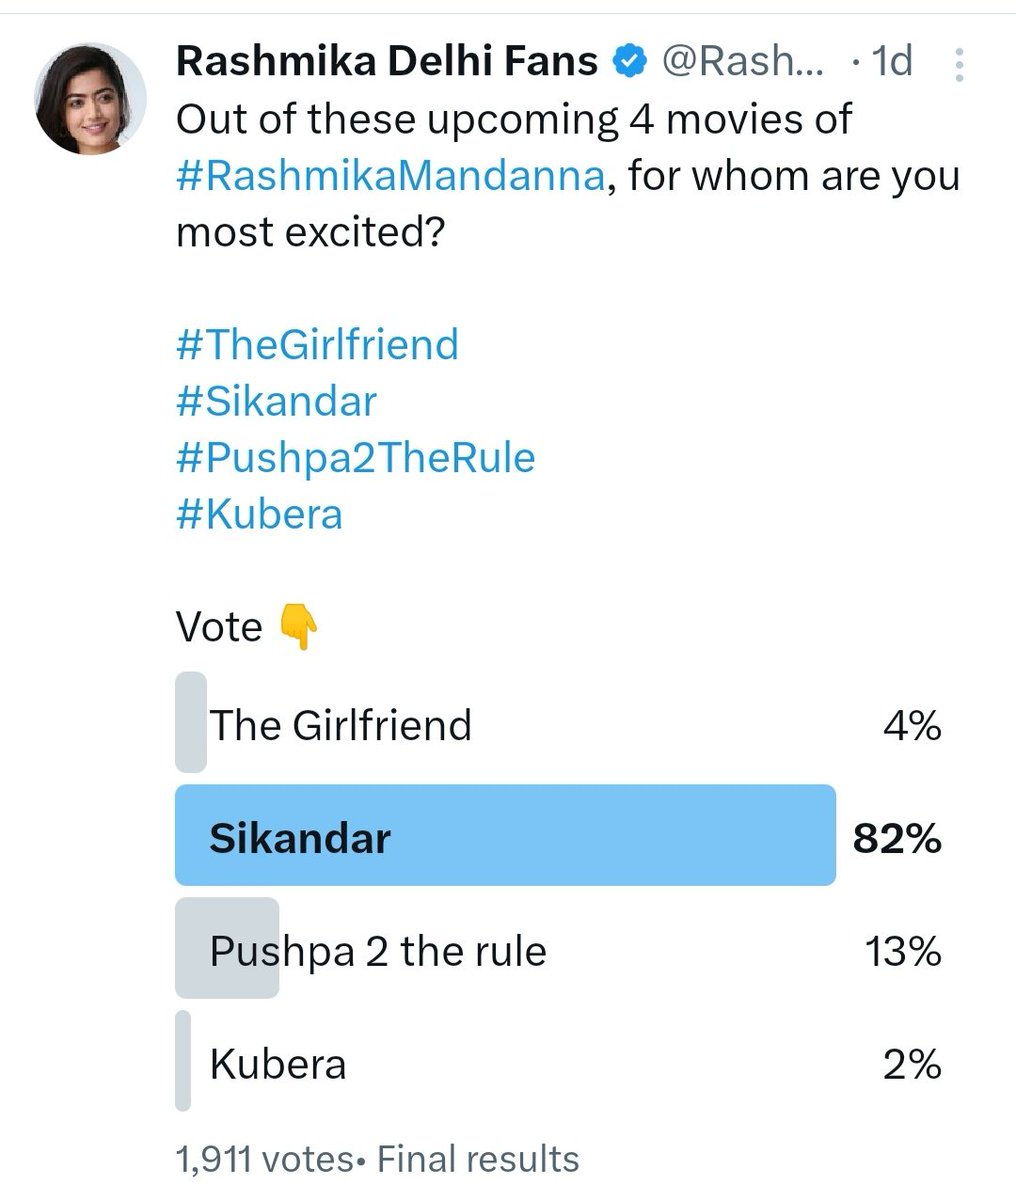 OMG, look at this
#Sikandar 🔥
That's what we call craze 
This was a one-sided competition. We all know #Pushpa2TheRule is releasing this August and despite the immense craze for that movie, there's so much craze for the pairing of #SalmanKhan & #RashmikaMandanna 
Unreal Craze🔥